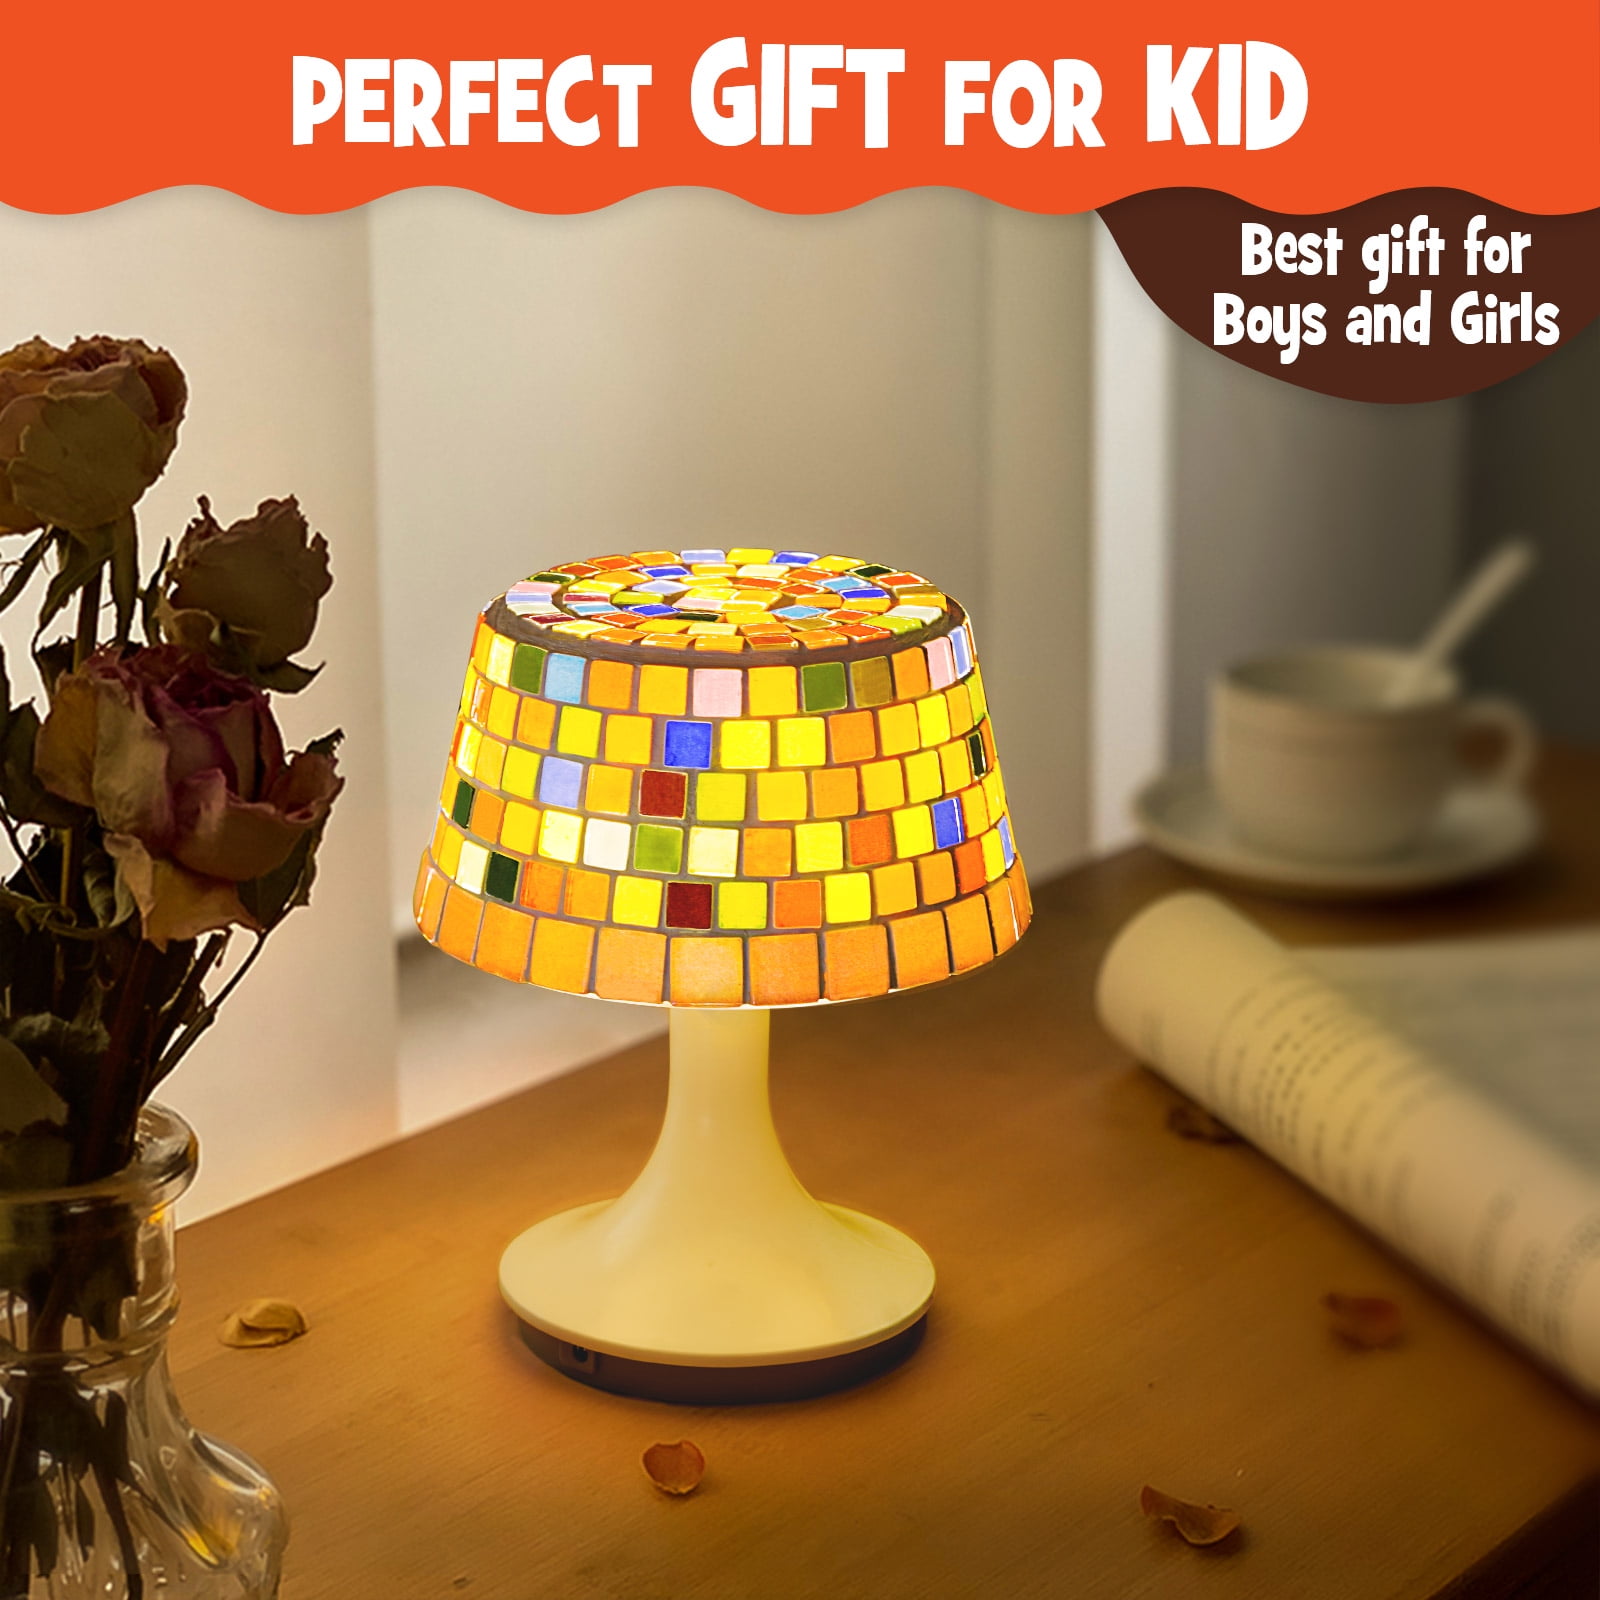  Kids NightLamp DIY Kit- Creative Arts and Crafts for Girls and  Boys Ages 5 Years and up- Stained Glass lamp with Window Paint and Circuit  - Best Gift Art Kits (Butterfly) 